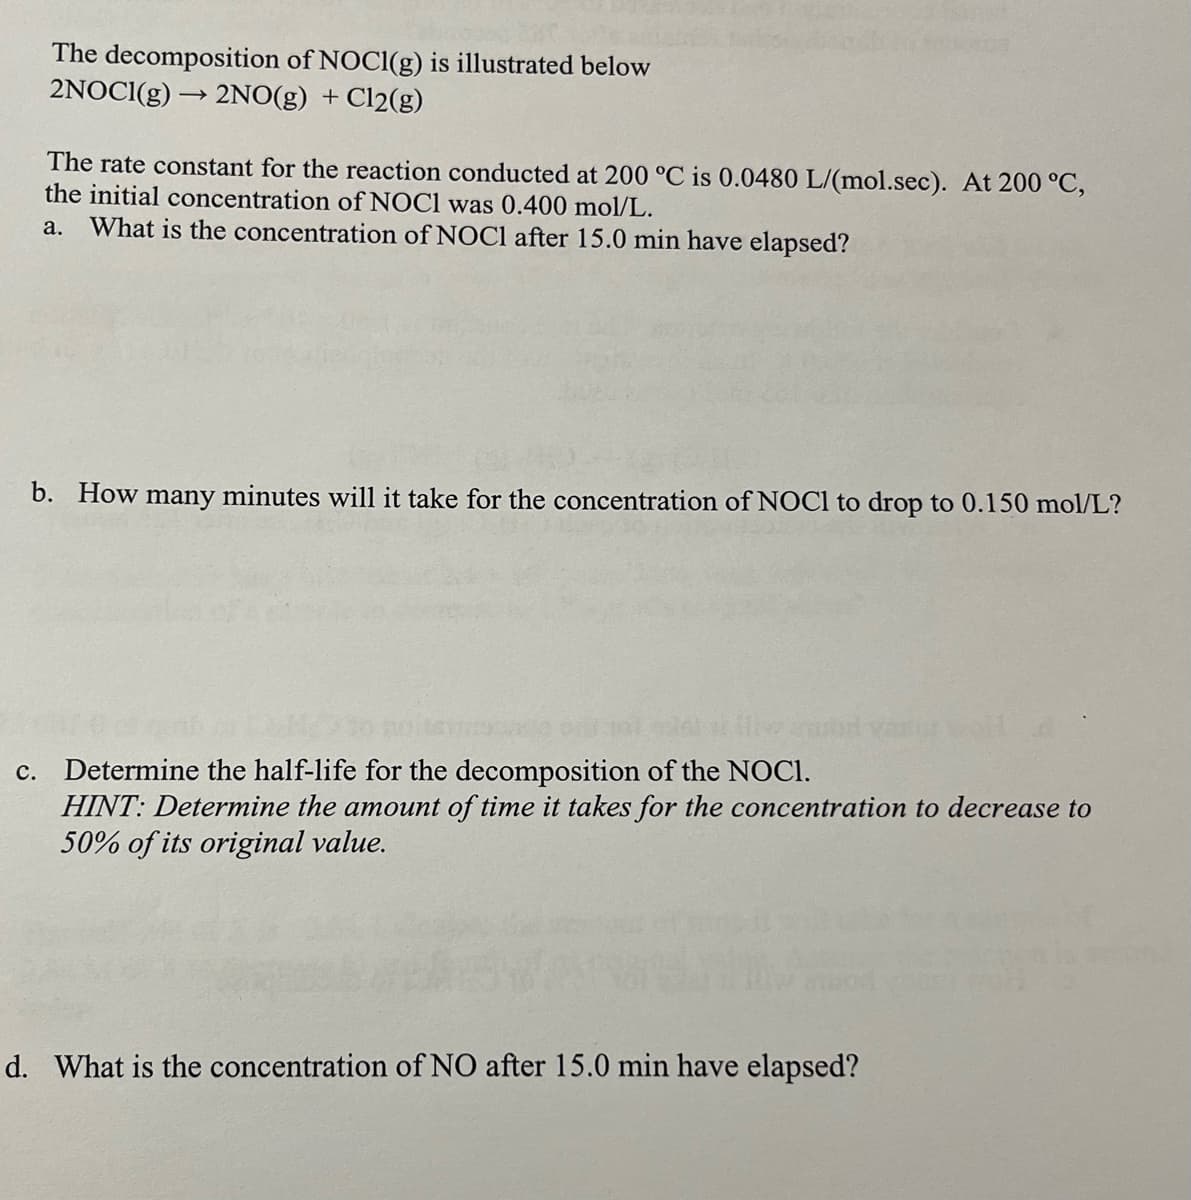 The decomposition of NOCI(g) is illustrated below
2NOCI(g) → 2NO(g) + Cl2(g)
The rate constant for the reaction conducted at 200 °C is 0.0480 L/(mol.sec). At 200 °C,
the initial concentration of NOCI was 0.400 mol/L.
a. What is the concentration of NOCI after 15.0 min have elapsed?
b. How many minutes will it take for the concentration of NOC1 to drop to 0.150 mol/L?
c. Determine the half-life for the decomposition of the NOCI.
HINT: Determine the amount of time it takes for the concentration to decrease to
50% of its original value.
d. What is the concentration of NO after 15.0 min have elapsed?